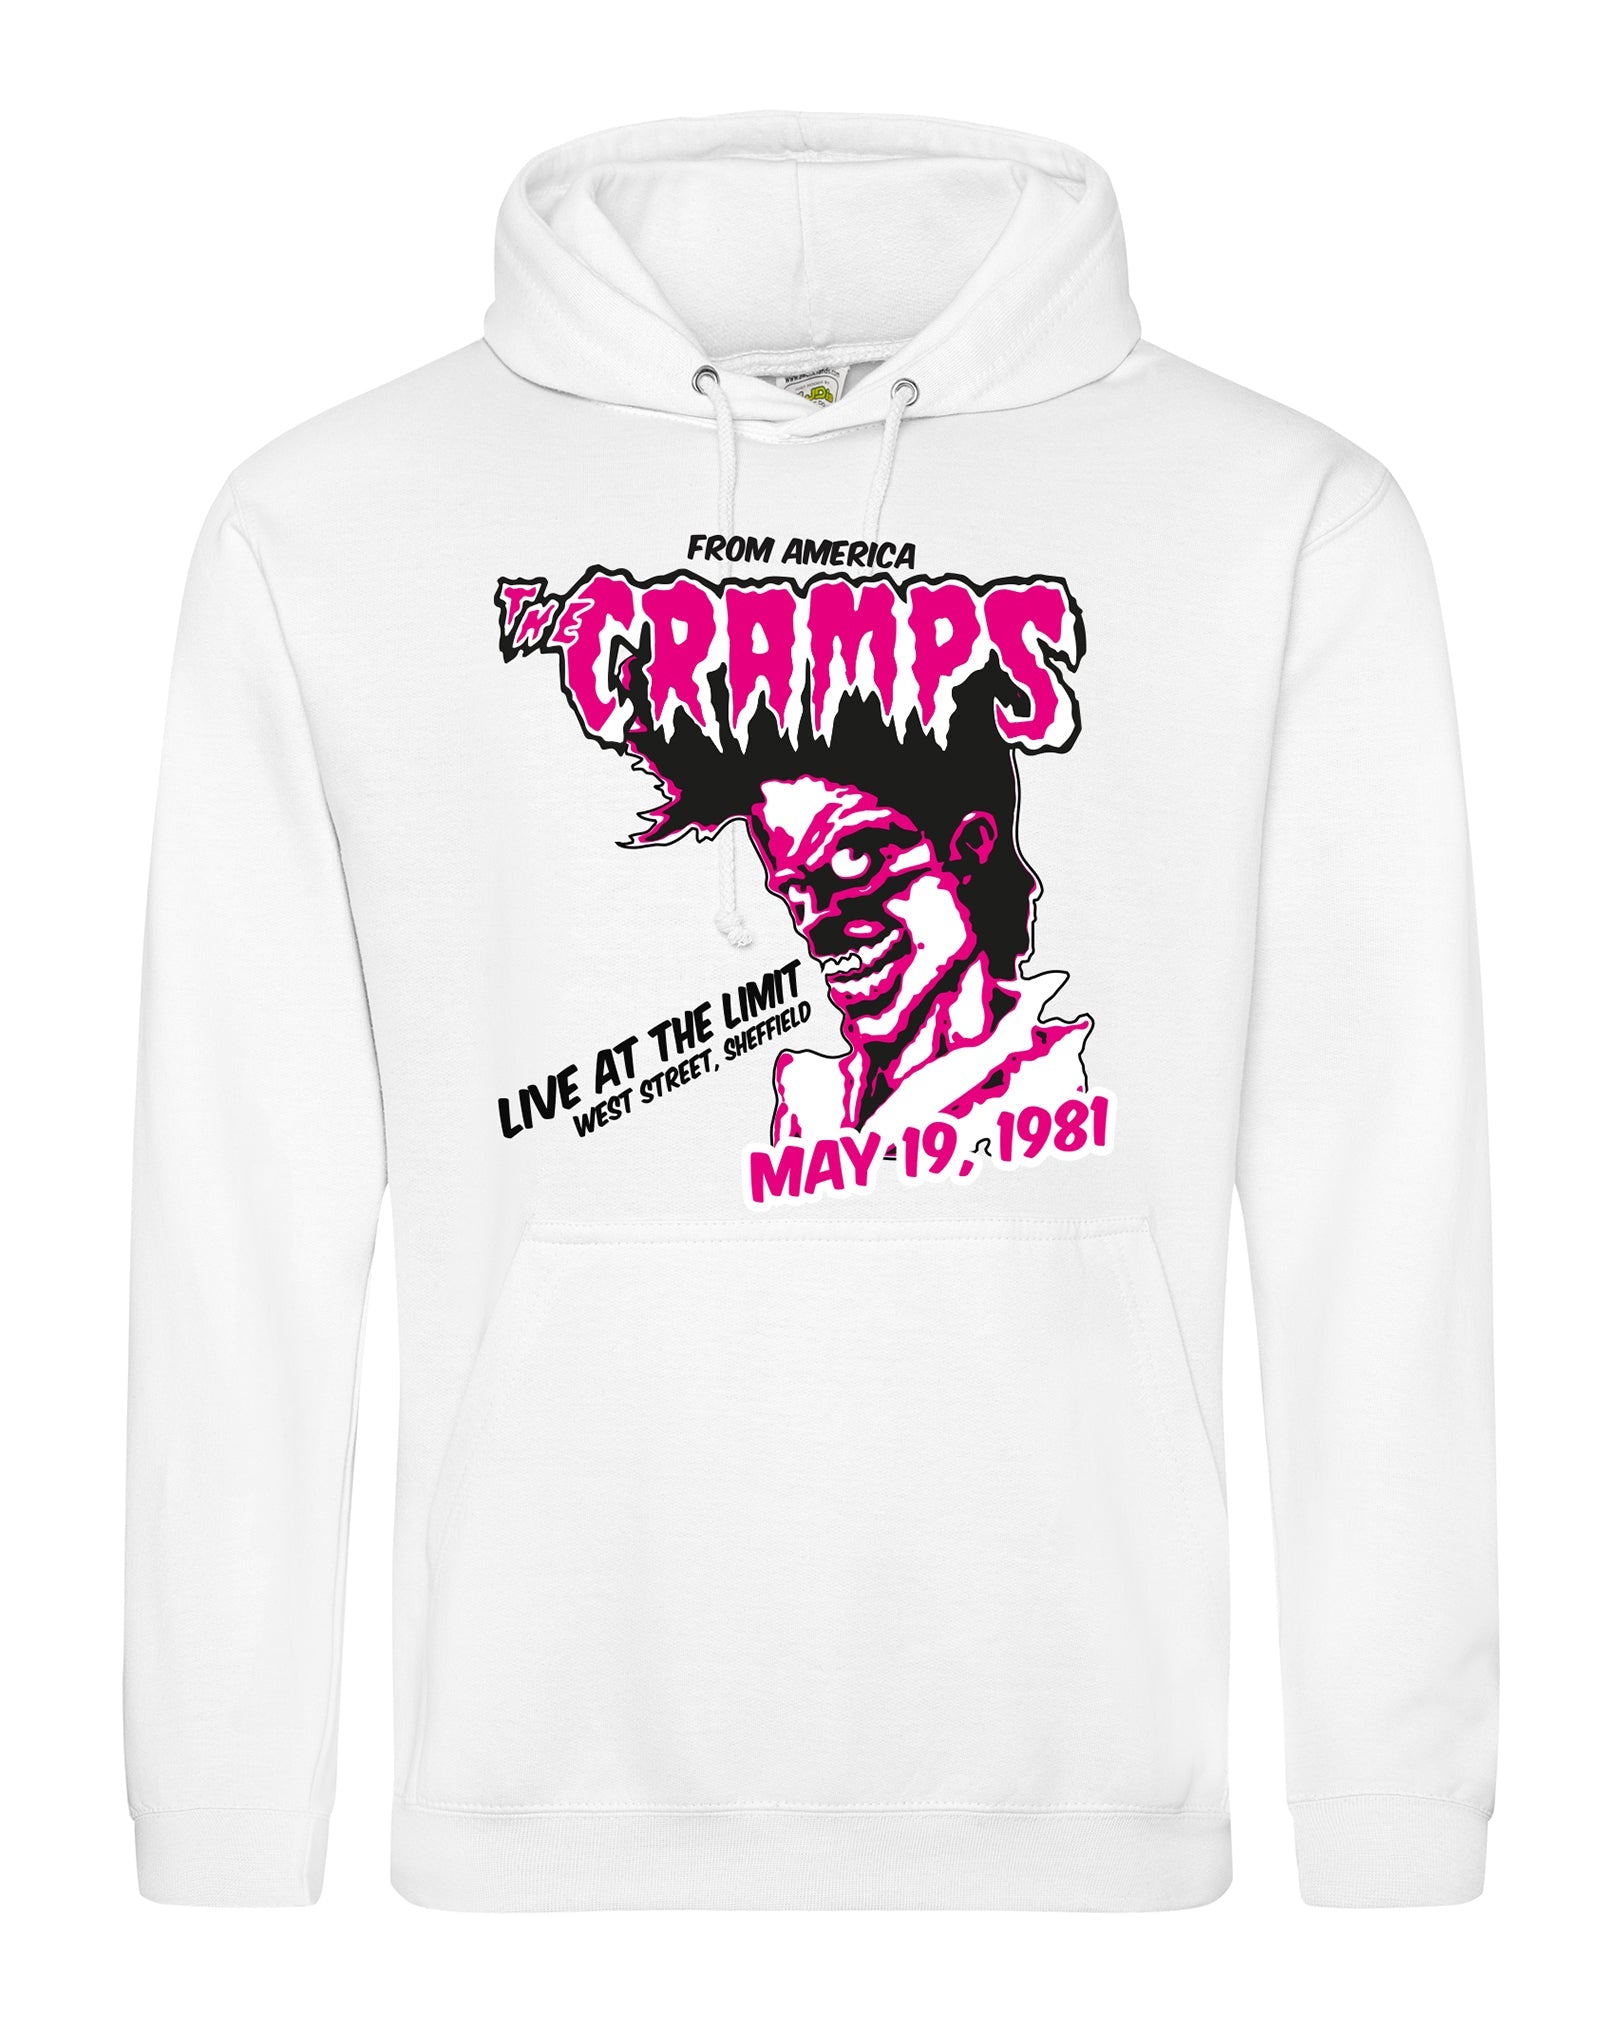 The Cramps at the Limit - unisex fit hoodie - various colours - Dirty Stop Outs